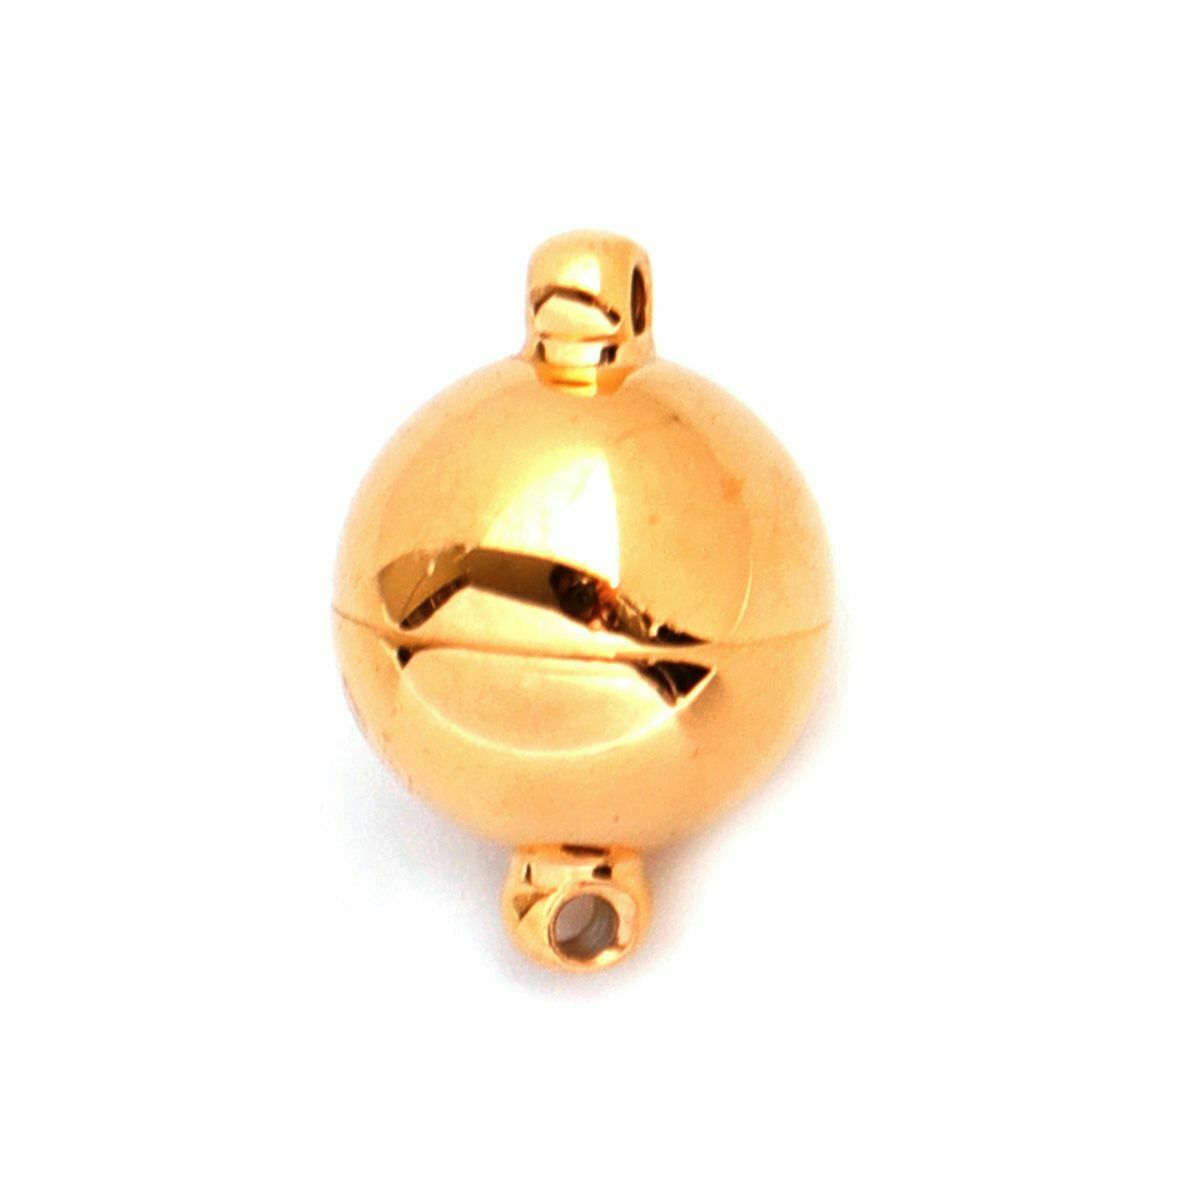 10mm Stainless Steel Magnetic Clasps Round Gold Plated 15mm x 10mm